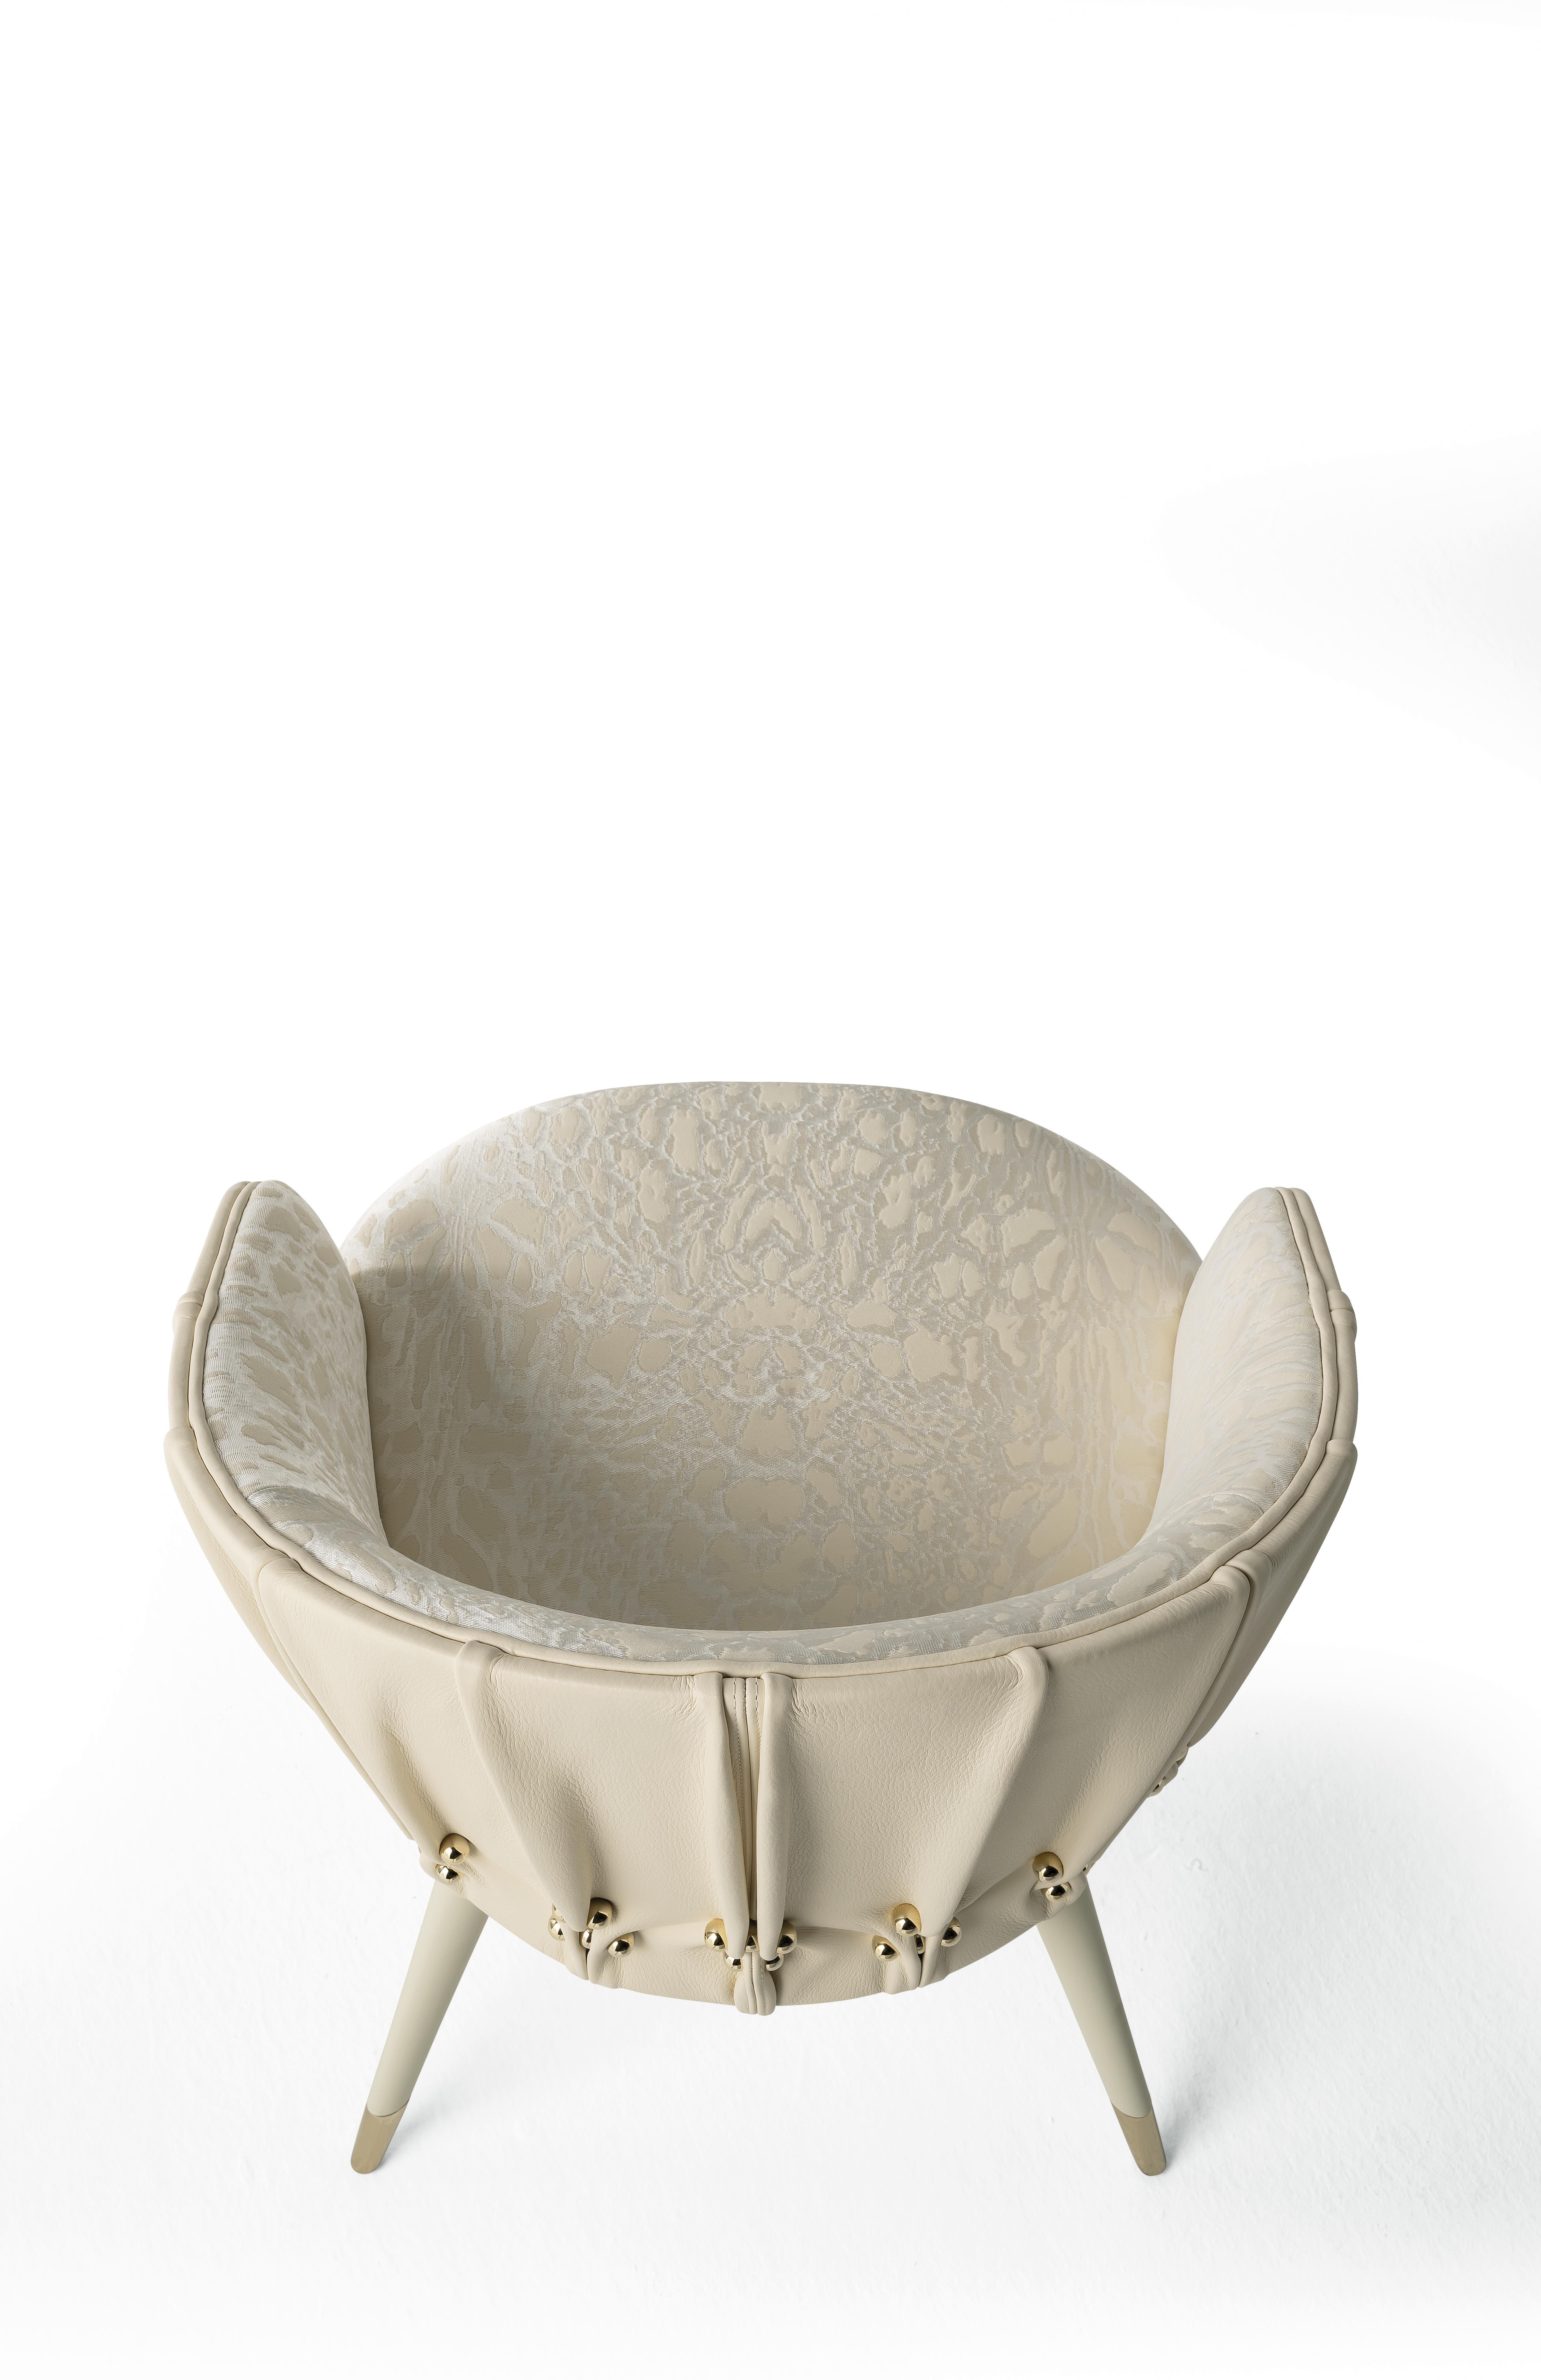 Contemporary 21st Century Inanda Chair in Leather by Roberto Cavalli Home Interiors For Sale